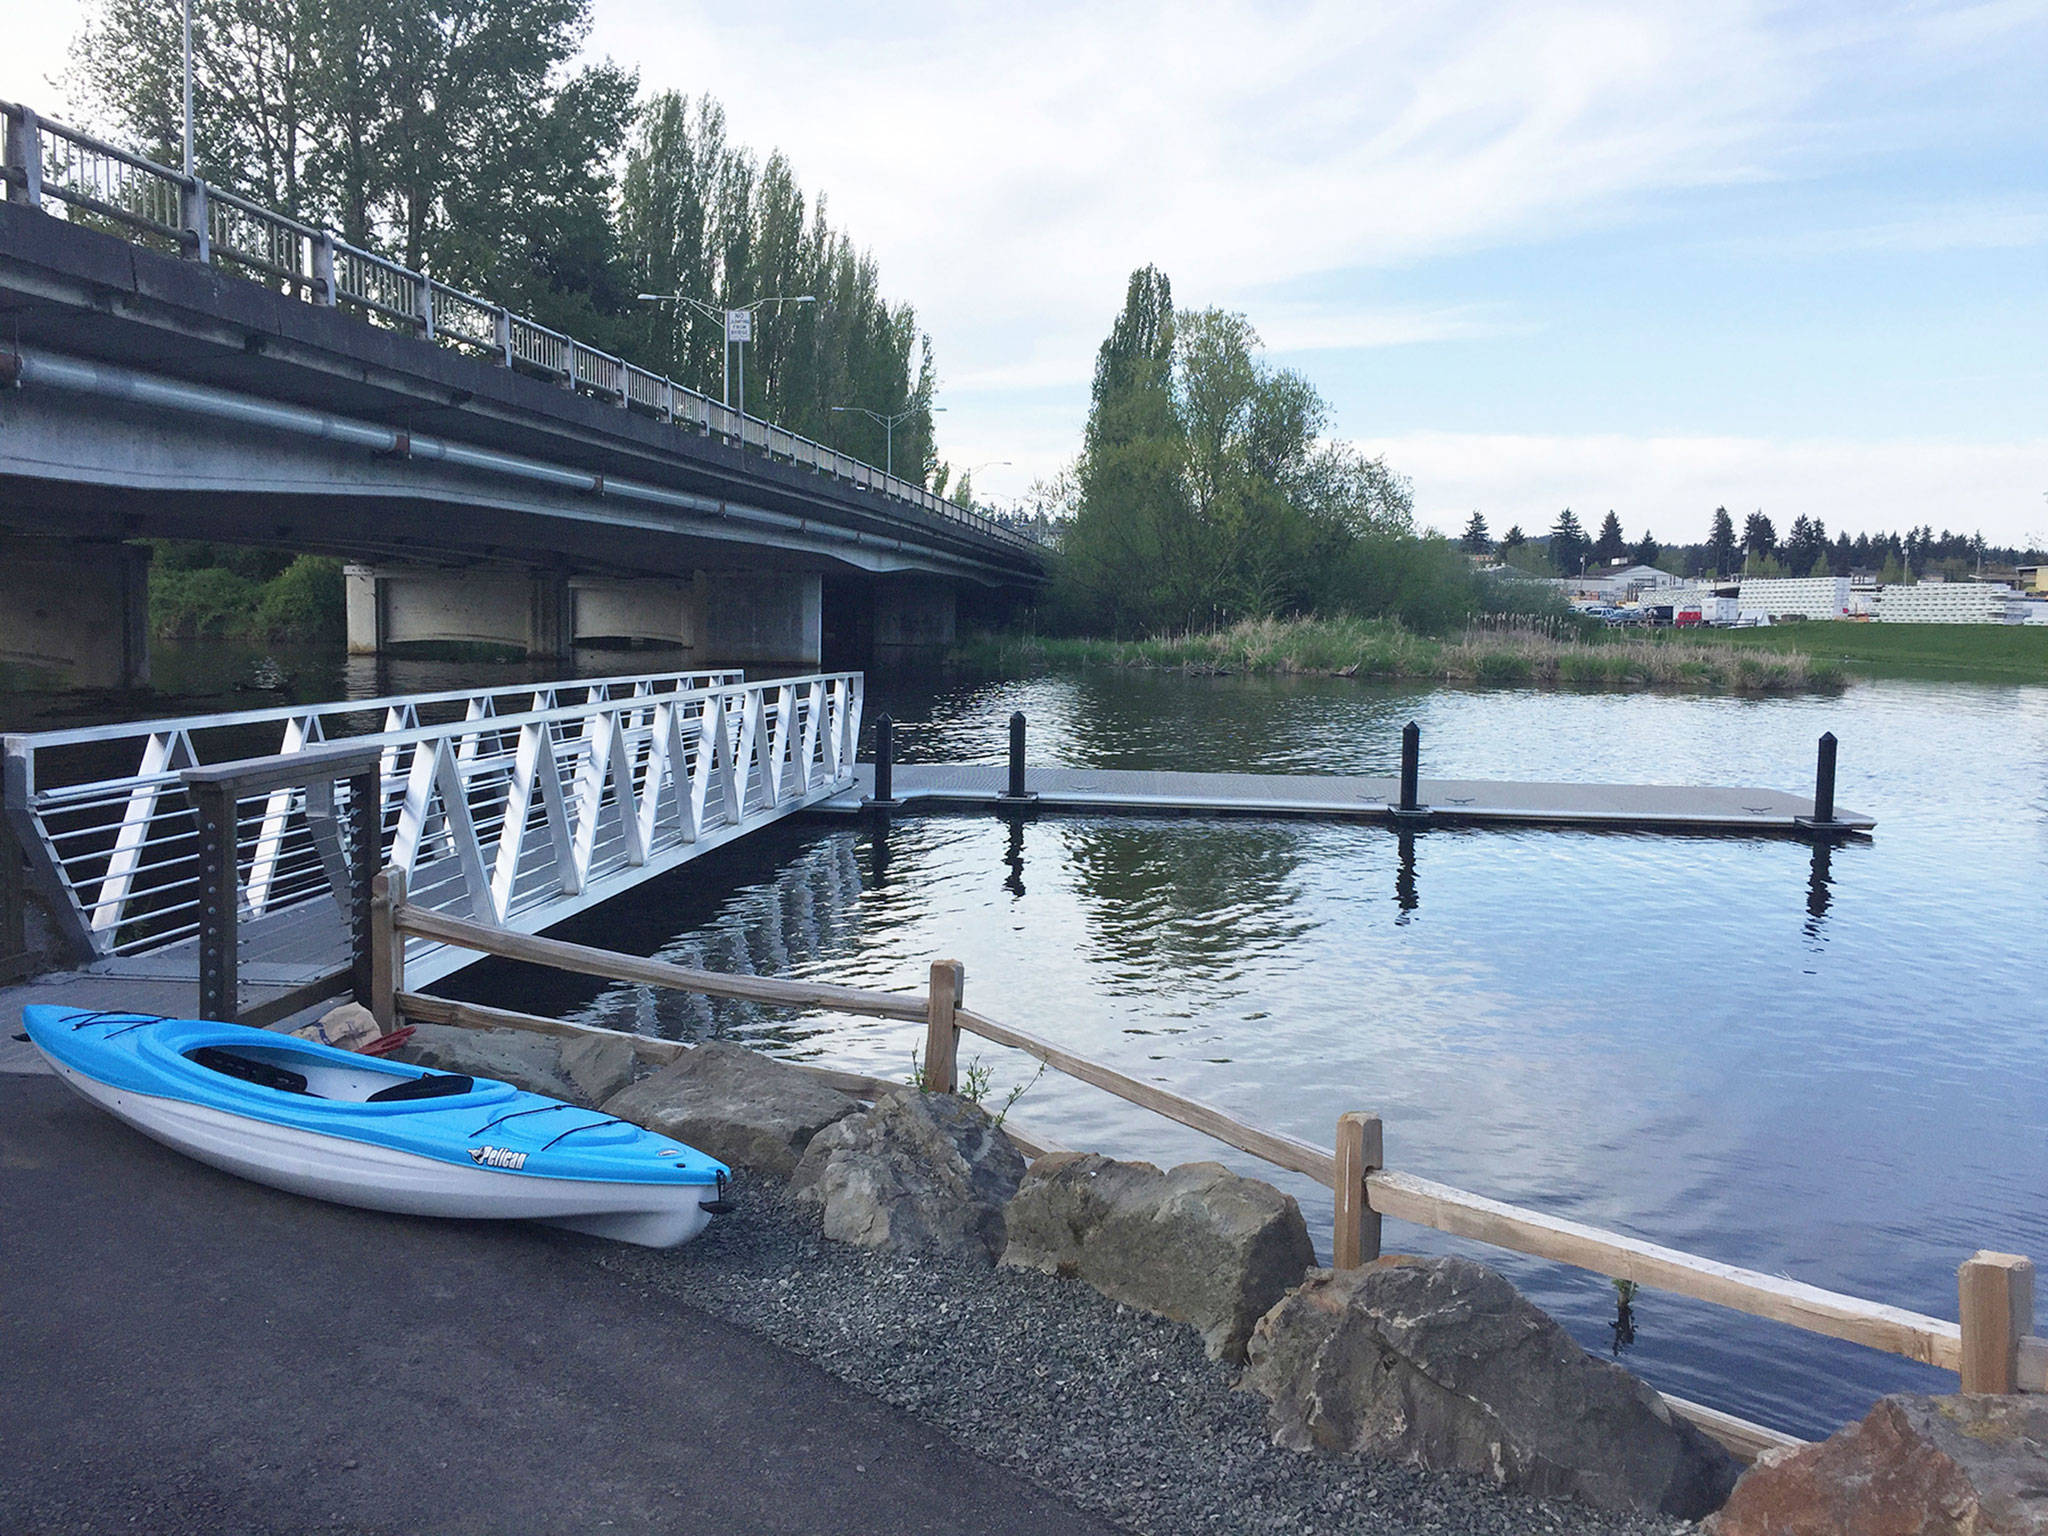 The first project of the voter-approved Walkways and Waterways Initiative — the new boardwalk and float at Rhododendron Park — is now complete. Photo courtesy of Becky Range/city of Kenmore